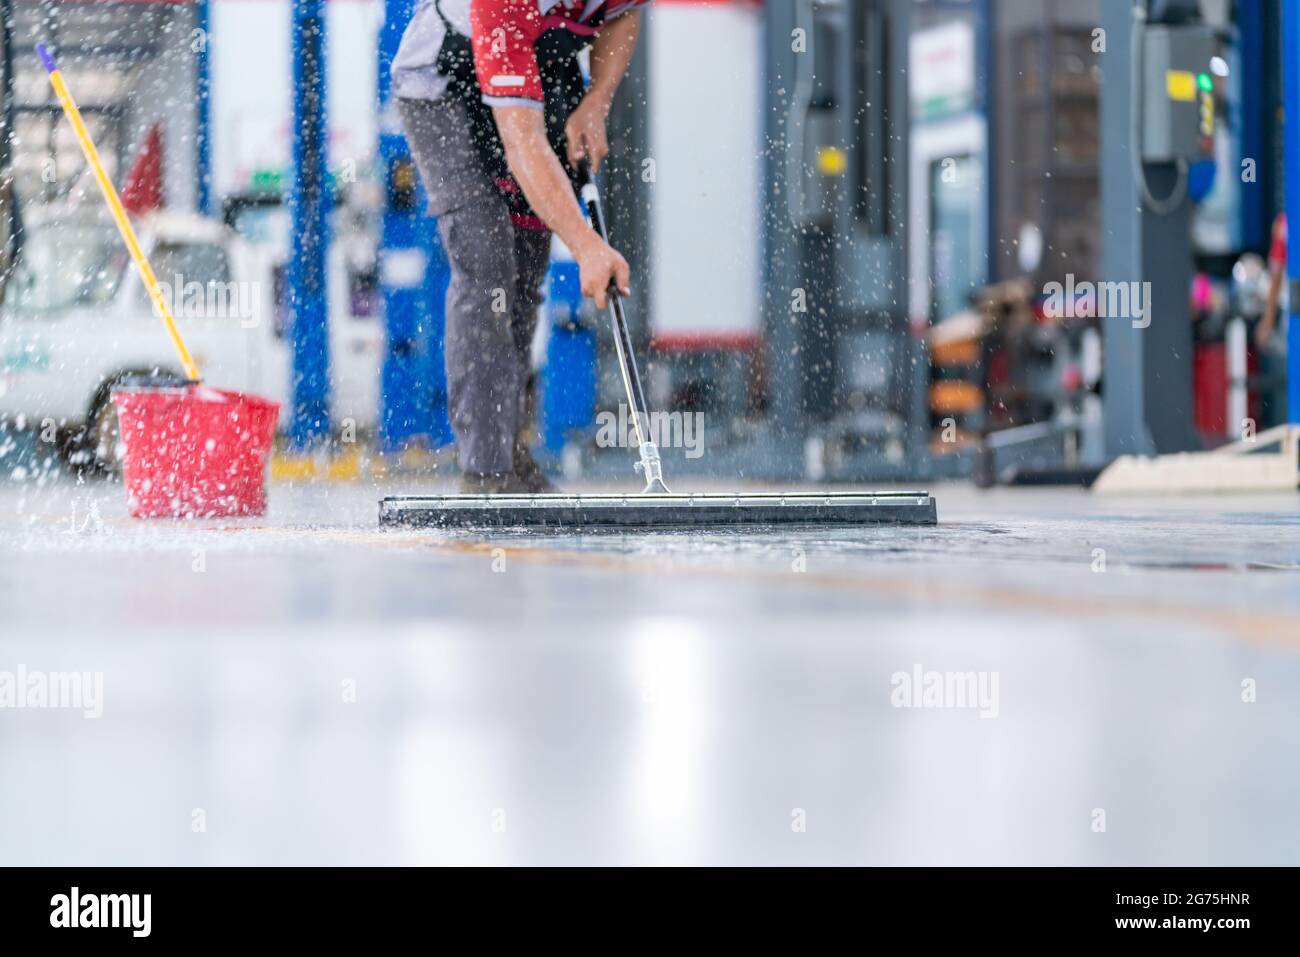 service staff man using a mop to remove water in the uniform cleaning the protective clothing of the new epoxy floor in an empty warehouse or car serv Stock Photo